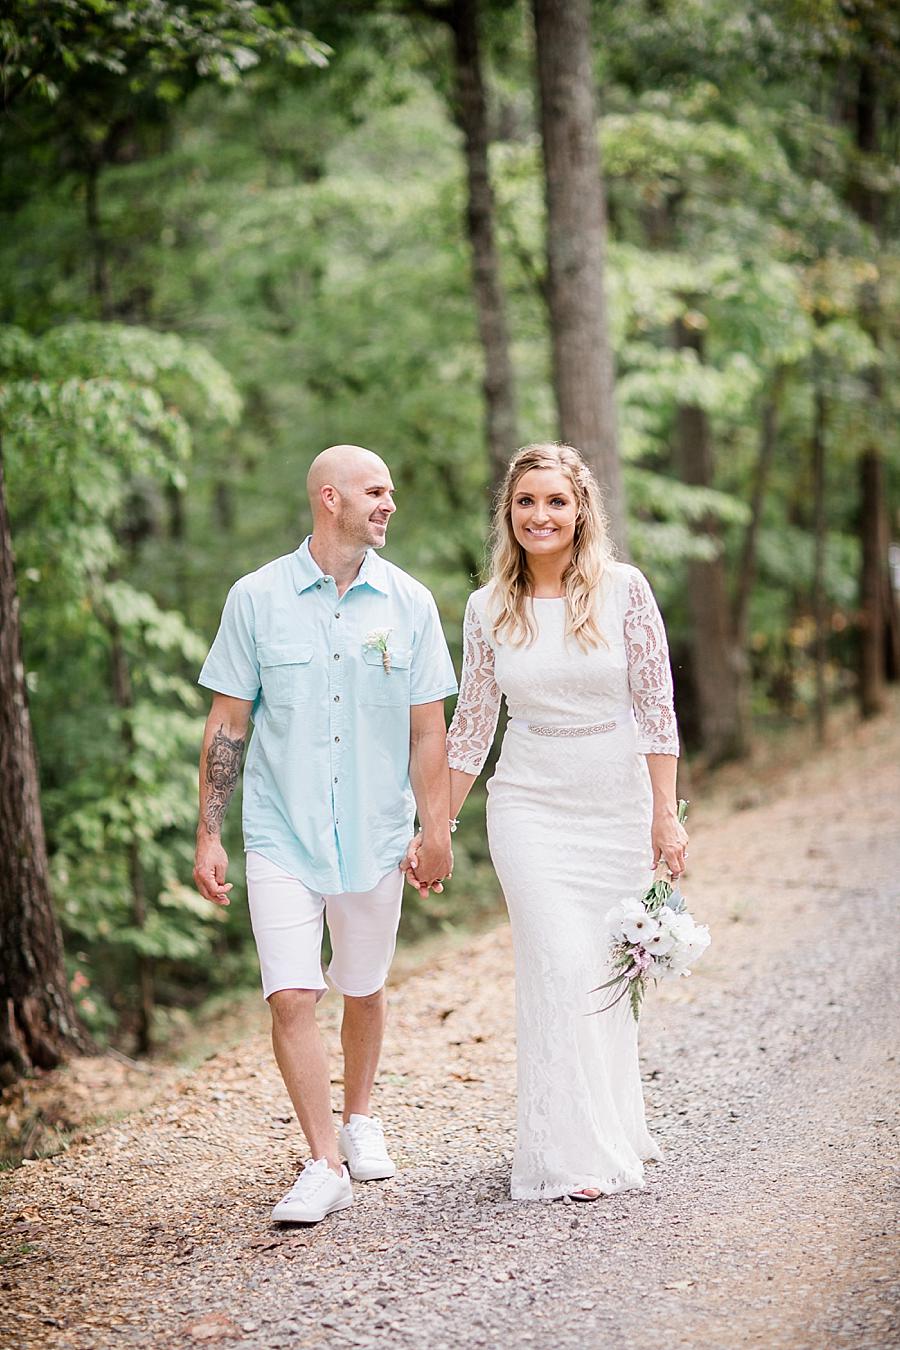 Gravel path at this Parkside Resort Destination Wedding by Knoxville Wedding Photographer, Amanda May Photos.